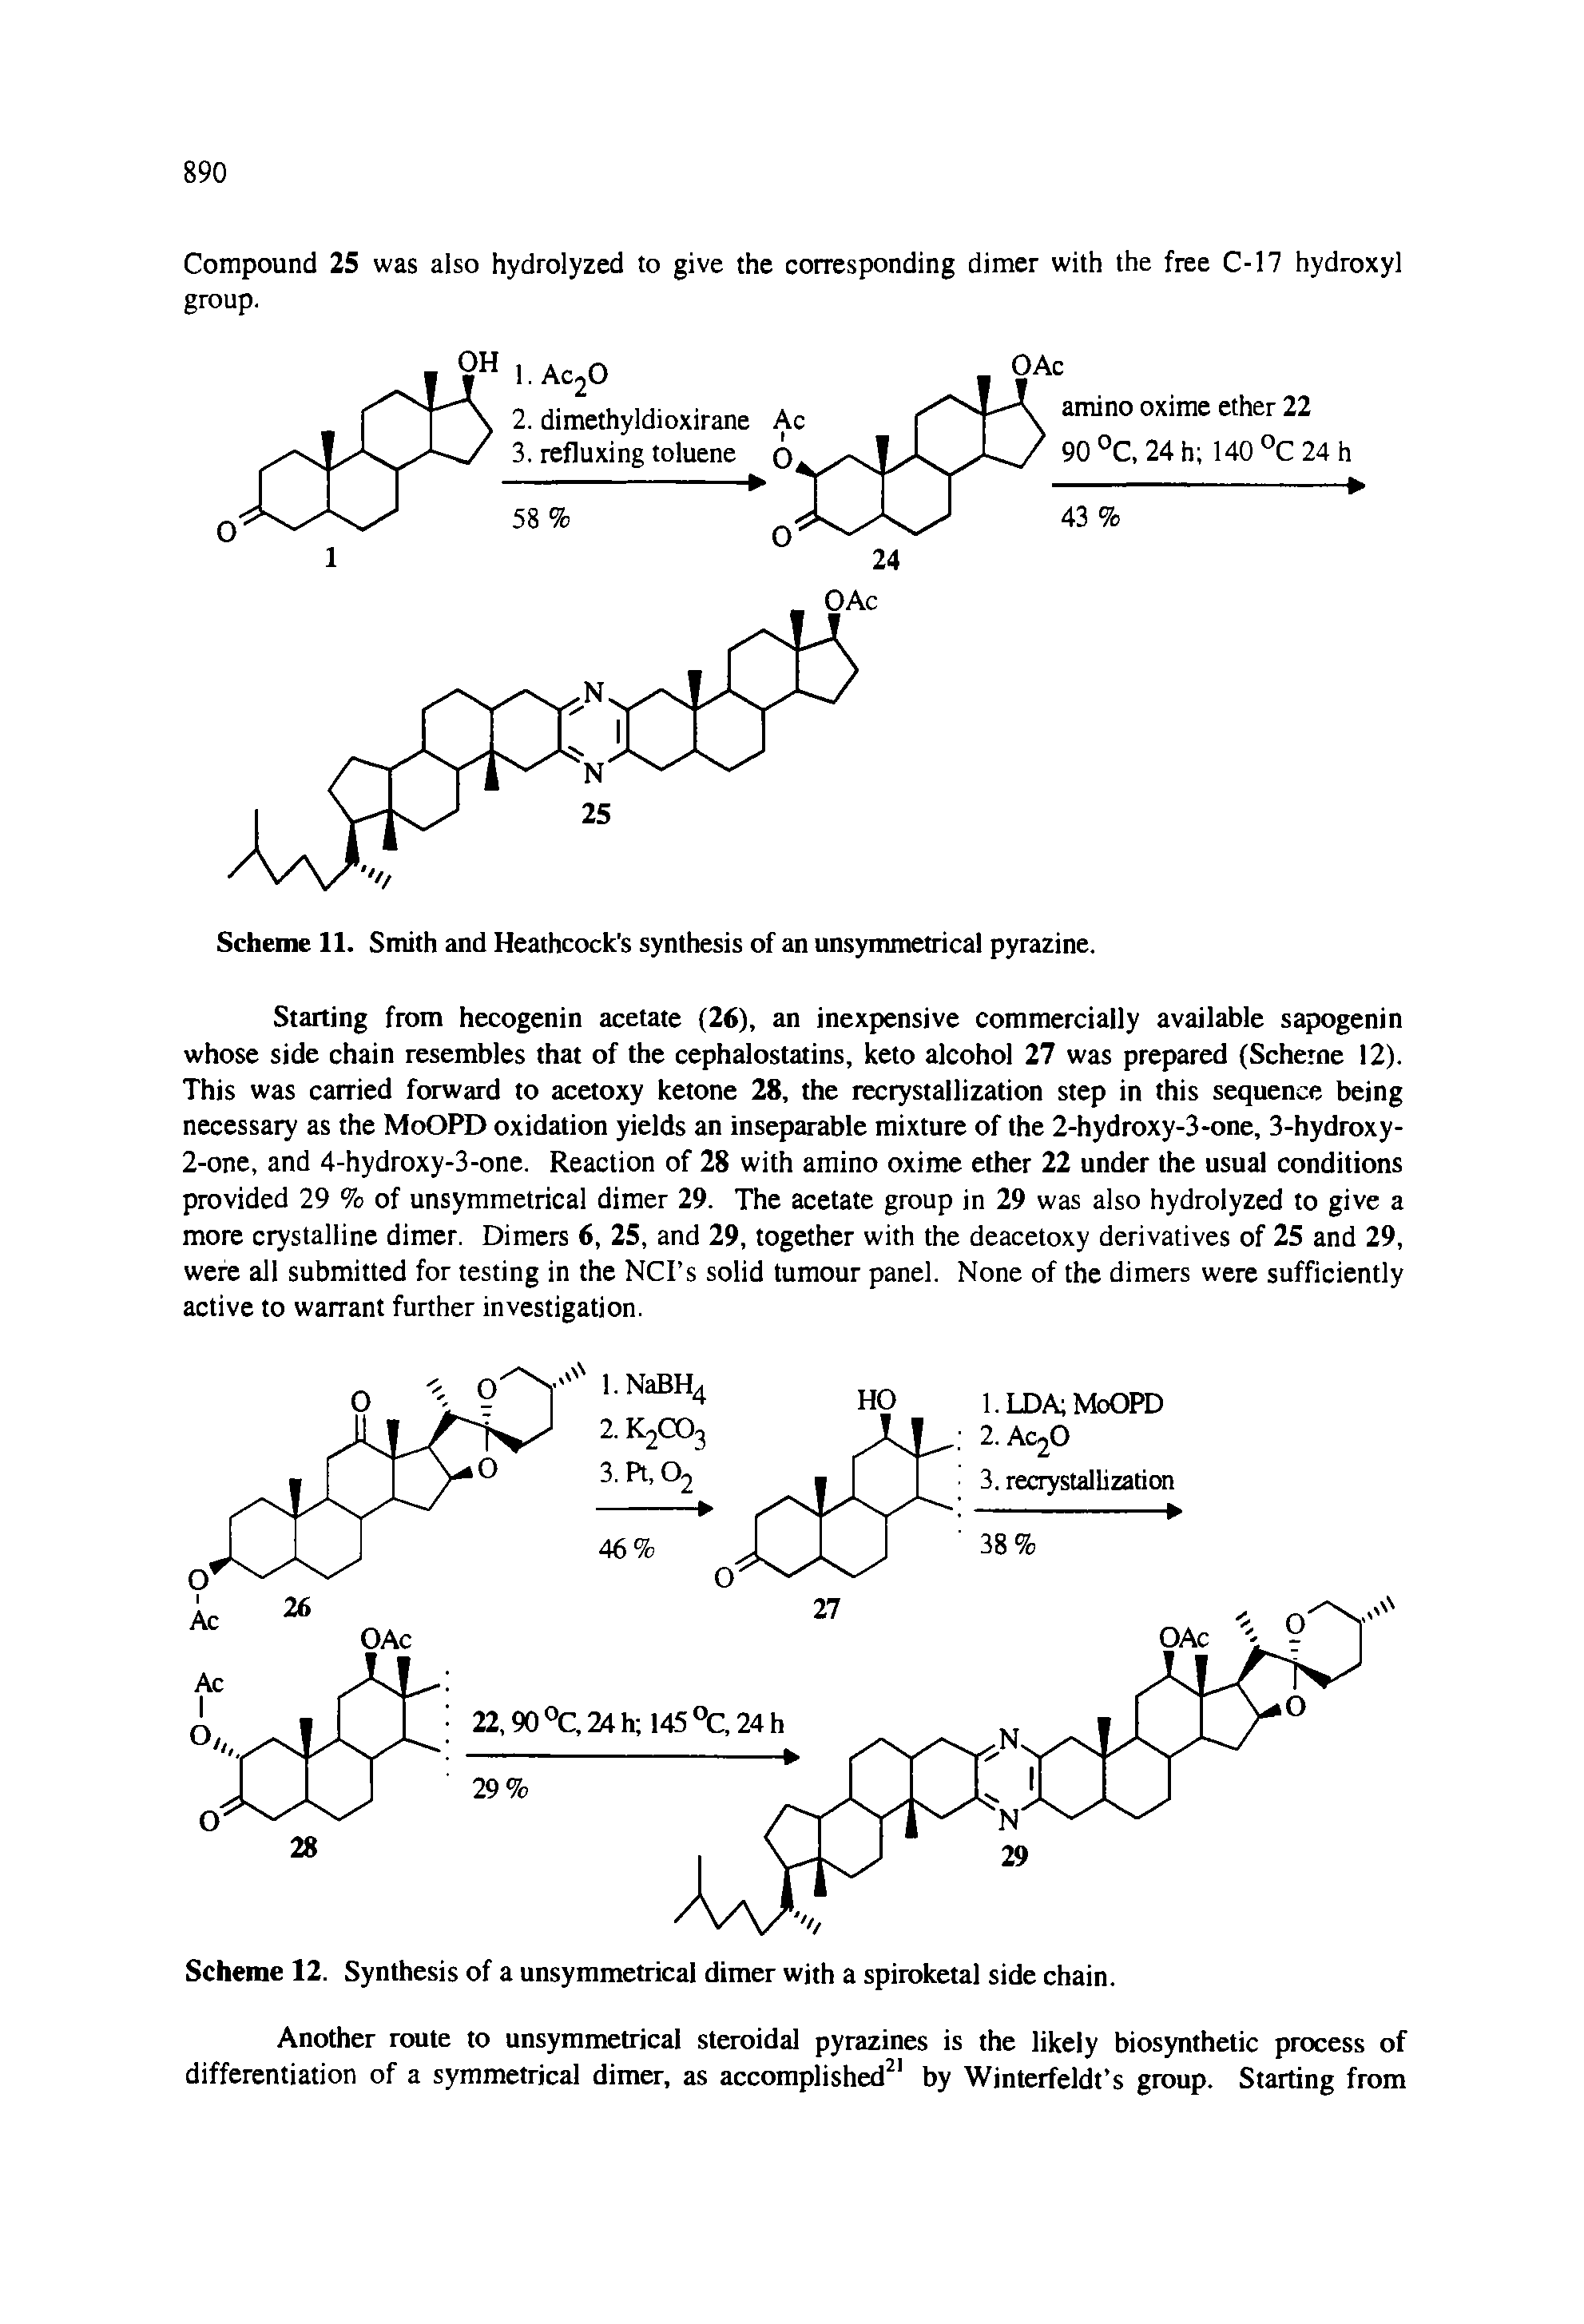 Scheme 11. Smith and Heathcock s synthesis of an unsymmetrical pyrazine.